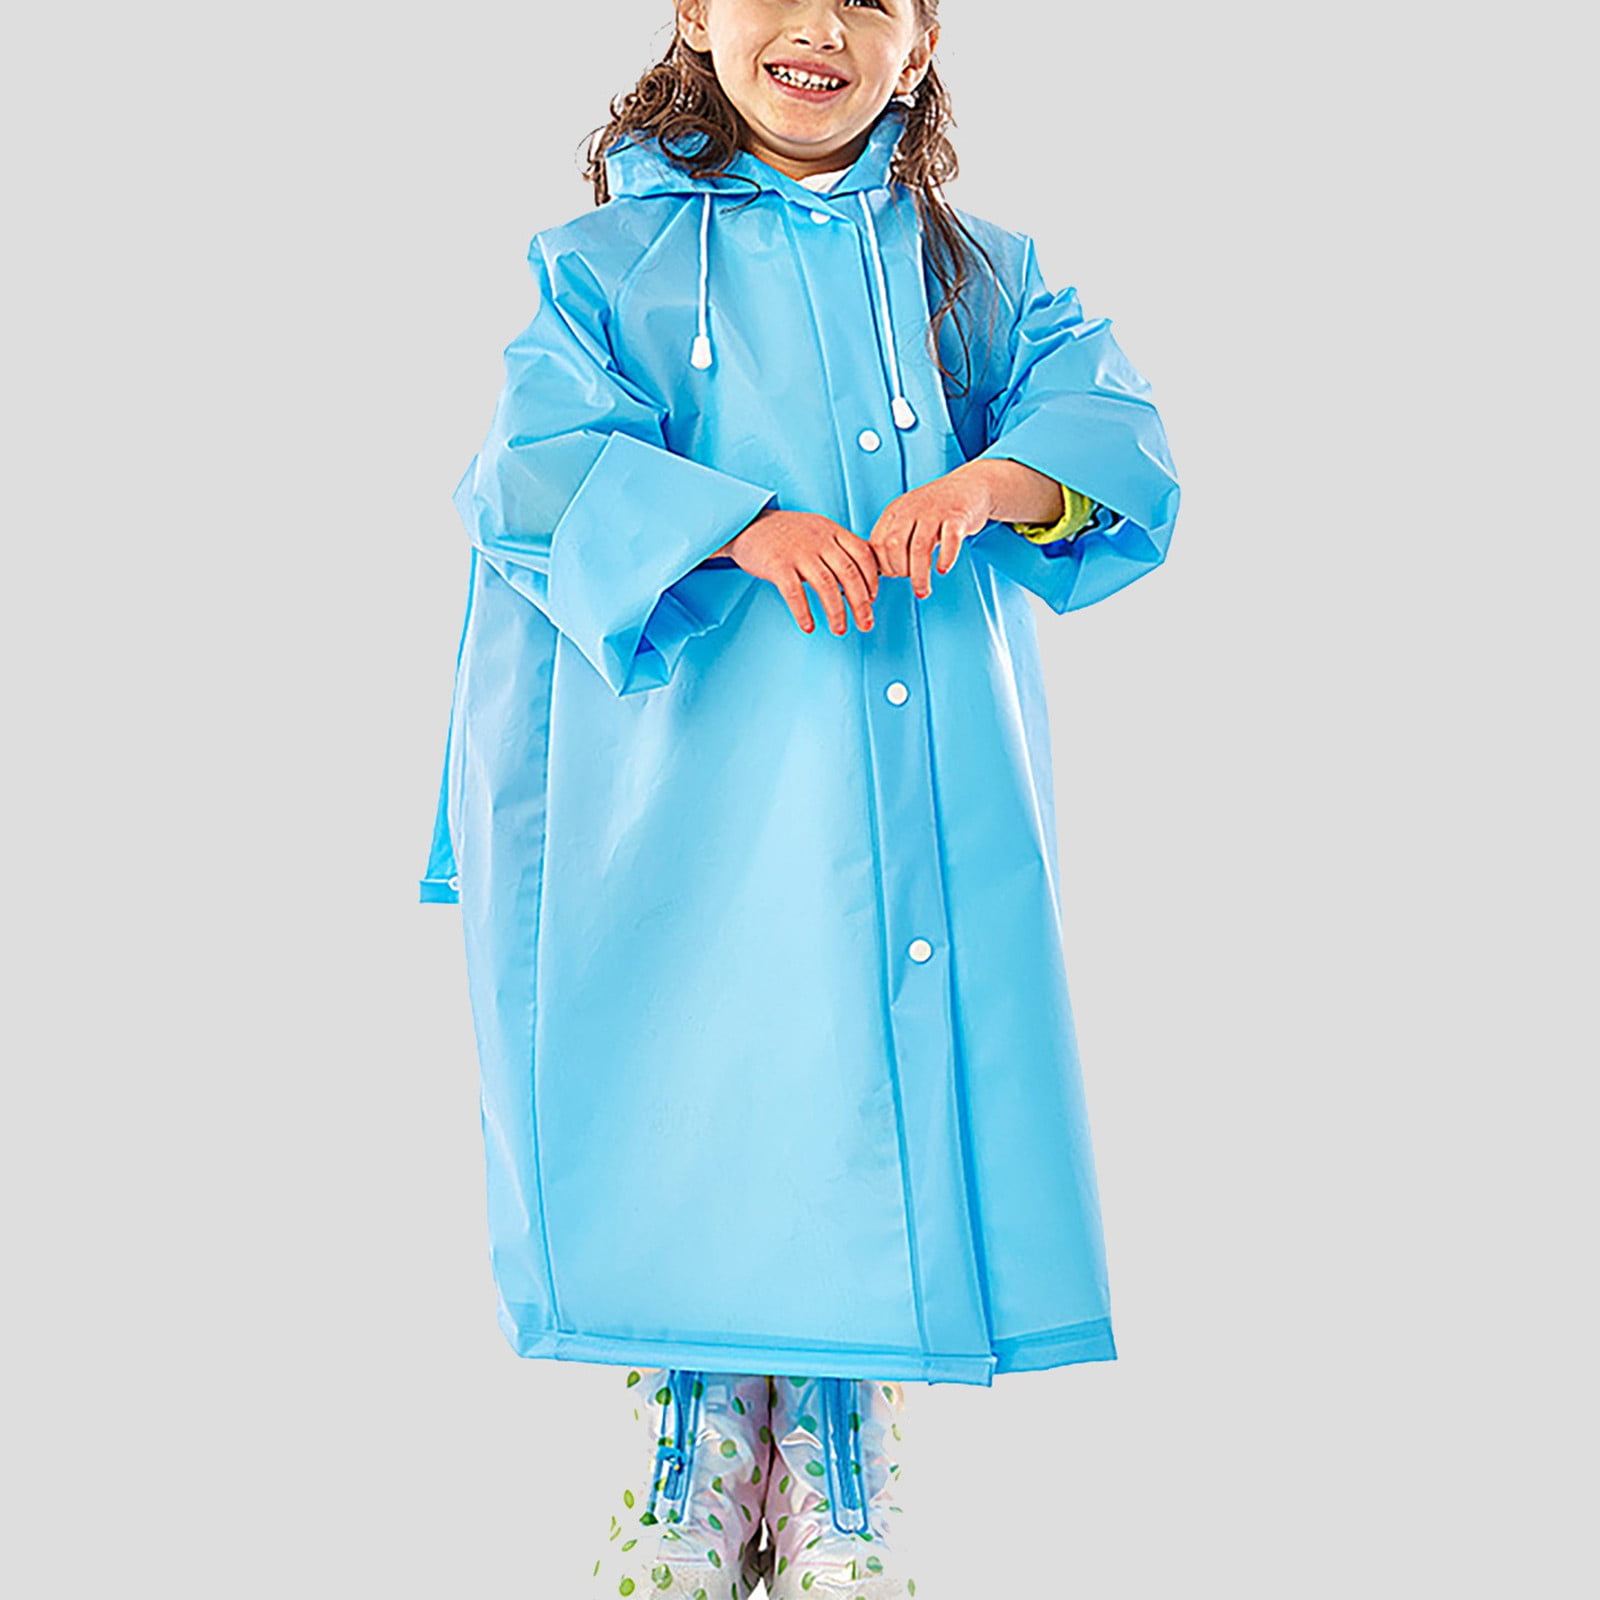 99native@ Hooded Raincoat for Kids Boys Girls Kids Star Hooded Rain Poncho Jacket Waterproof Raincoat with Relaxing Carrying Bag Boys and Girls Size:S-XL 